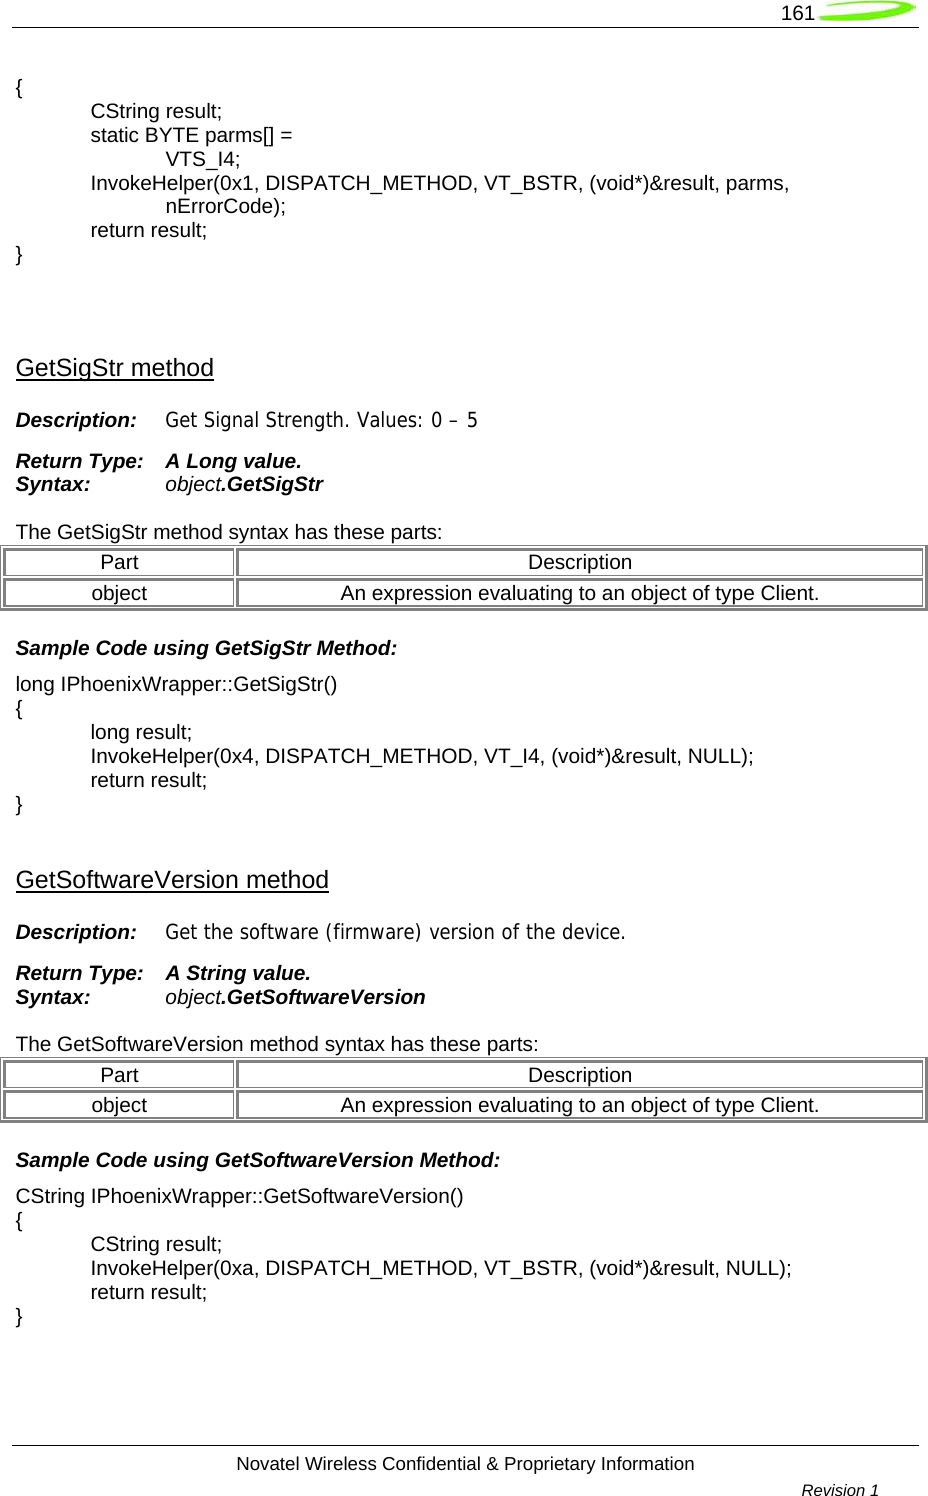   161  Novatel Wireless Confidential &amp; Proprietary Information        Revision 1   {  CString result;   static BYTE parms[] =   VTS_I4;  InvokeHelper(0x1, DISPATCH_METHOD, VT_BSTR, (void*)&amp;result, parms,   nErrorCode);  return result; }   GetSigStr method Description:  Get Signal Strength. Values: 0 – 5 Return Type:  A Long value. Syntax:  object.GetSigStr  The GetSigStr method syntax has these parts: Part Description object  An expression evaluating to an object of type Client. Sample Code using GetSigStr Method: long IPhoenixWrapper::GetSigStr() {  long result;  InvokeHelper(0x4, DISPATCH_METHOD, VT_I4, (void*)&amp;result, NULL);  return result; }  GetSoftwareVersion method Description:  Get the software (firmware) version of the device. Return Type:  A String value. Syntax:  object.GetSoftwareVersion  The GetSoftwareVersion method syntax has these parts: Part Description object  An expression evaluating to an object of type Client. Sample Code using GetSoftwareVersion Method: CString IPhoenixWrapper::GetSoftwareVersion() {  CString result;  InvokeHelper(0xa, DISPATCH_METHOD, VT_BSTR, (void*)&amp;result, NULL);  return result; }  